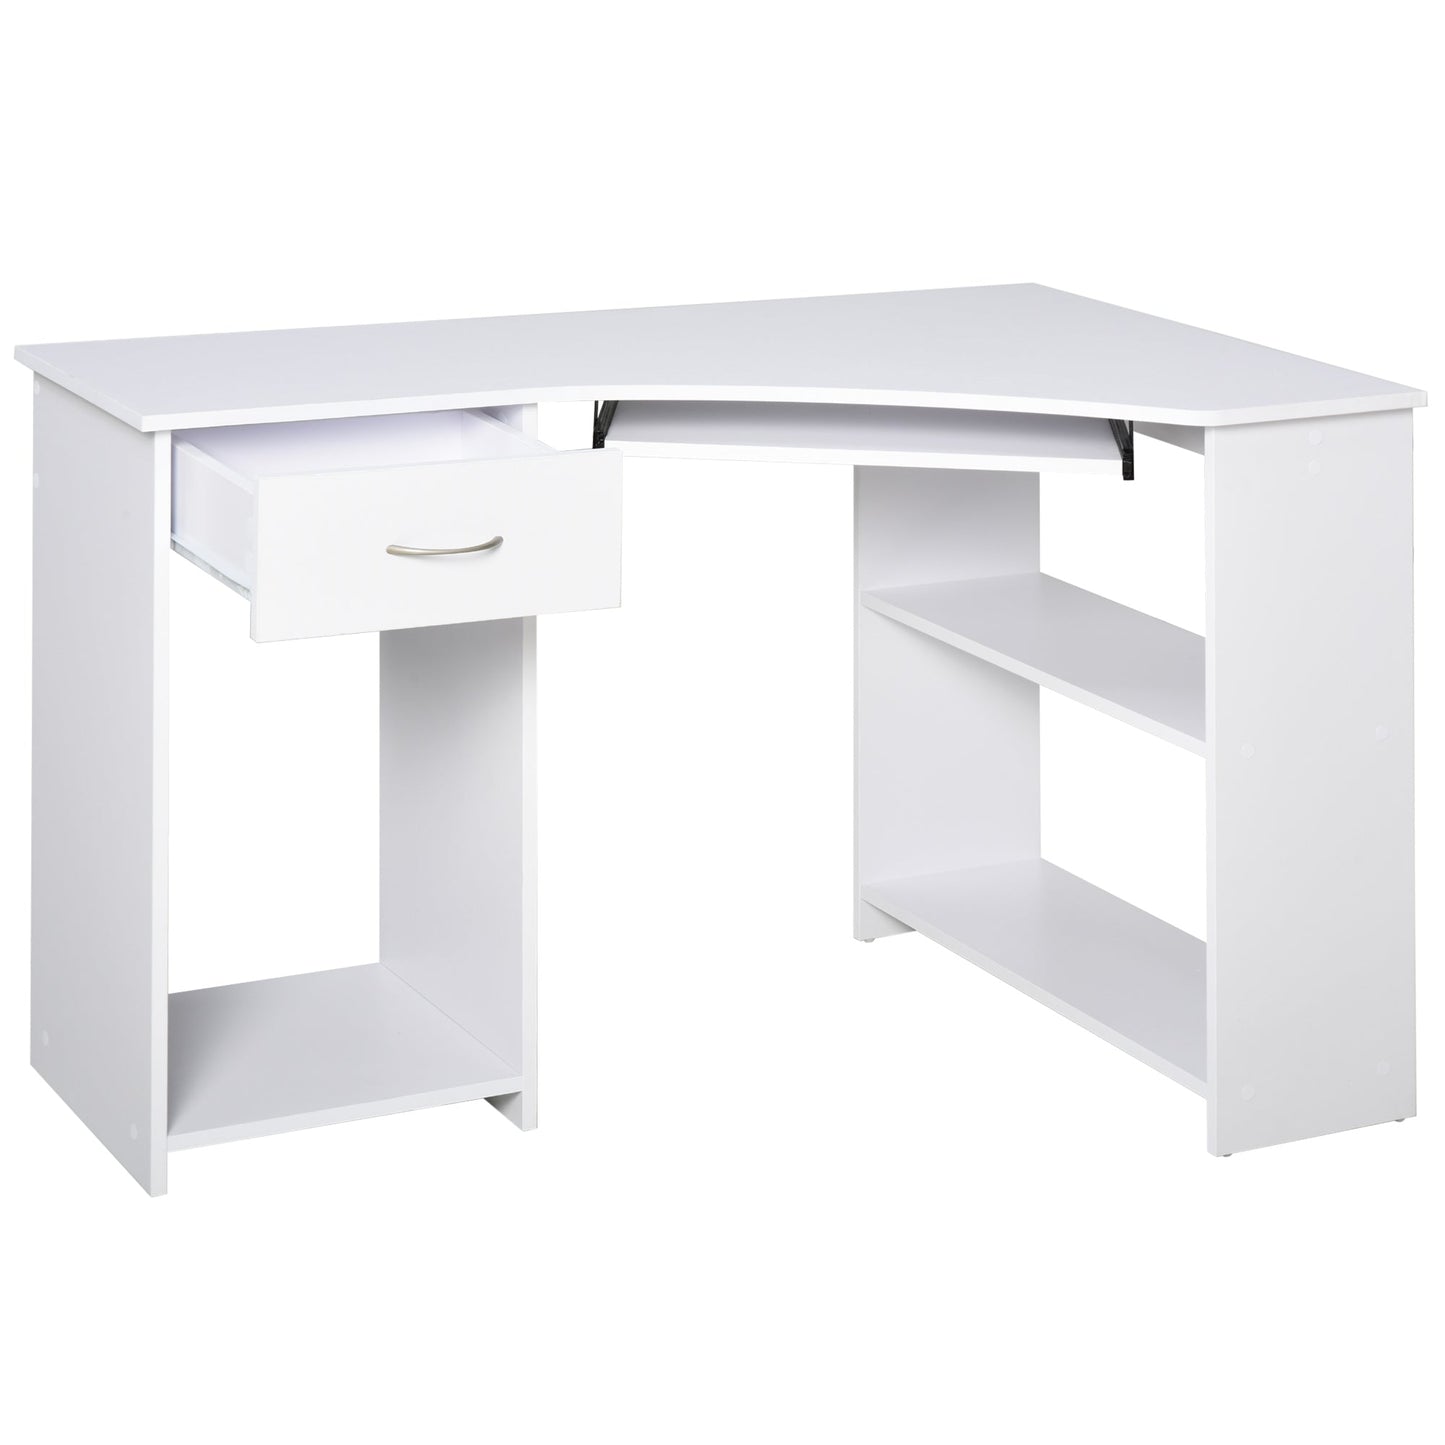 ProperAV Extra L-Shaped Corner Computer Desk & 2-Tier Side Shelves Wide Table Top with Keyboard Tray Office Study Bedroom Furniture - White - maplin.co.uk